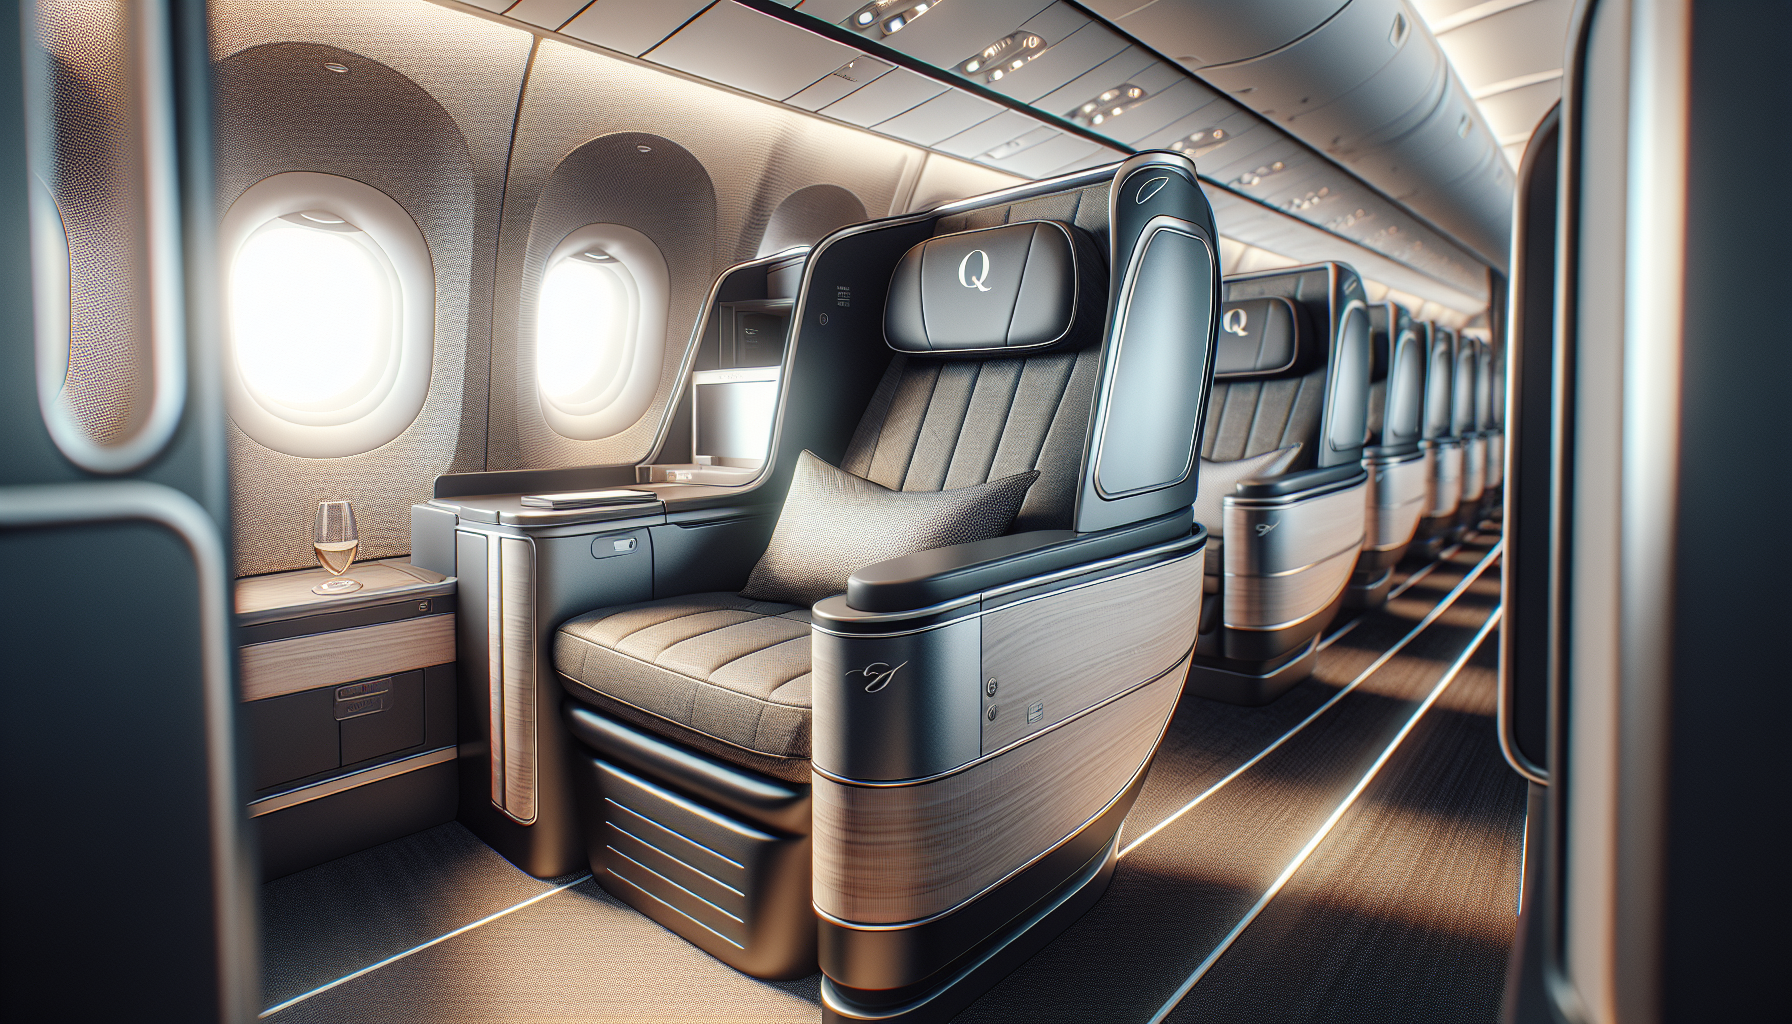 Flying Qatar Airways’ Non-Qsuite Business Class on a Boeing 787-8 Dreamliner: A Luxurious Experience